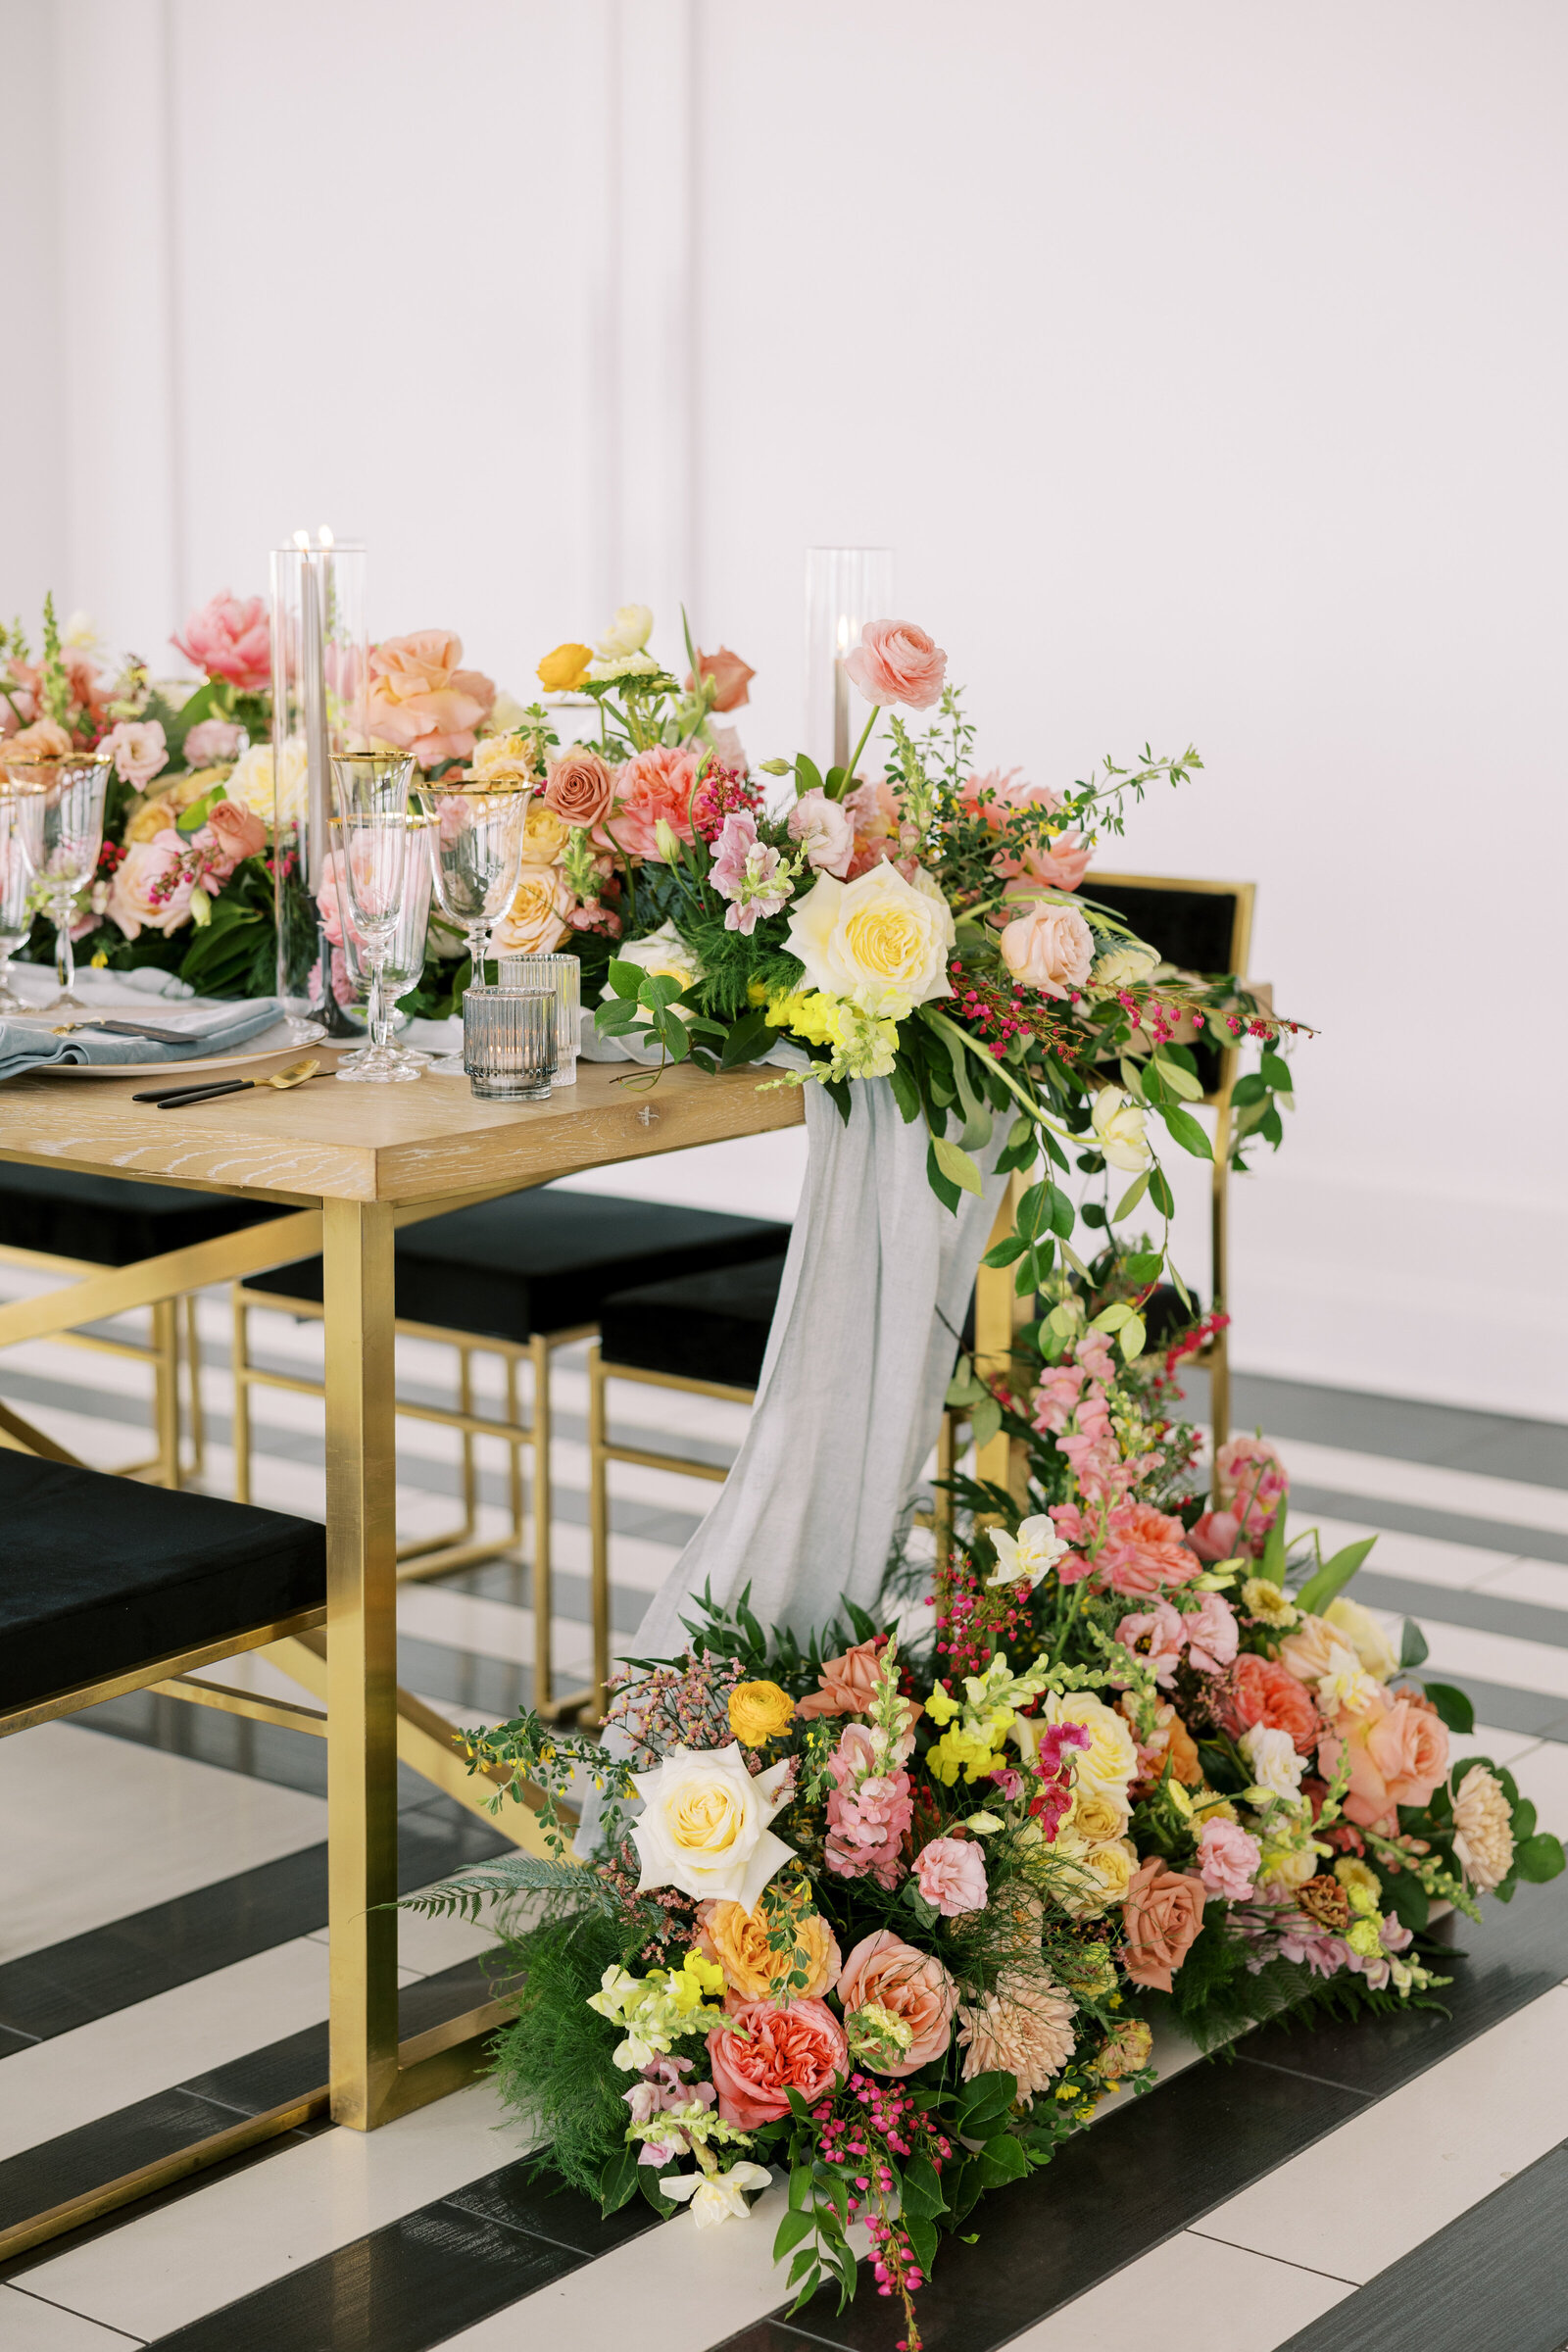 Beautiful wedding decor with colorful flowers